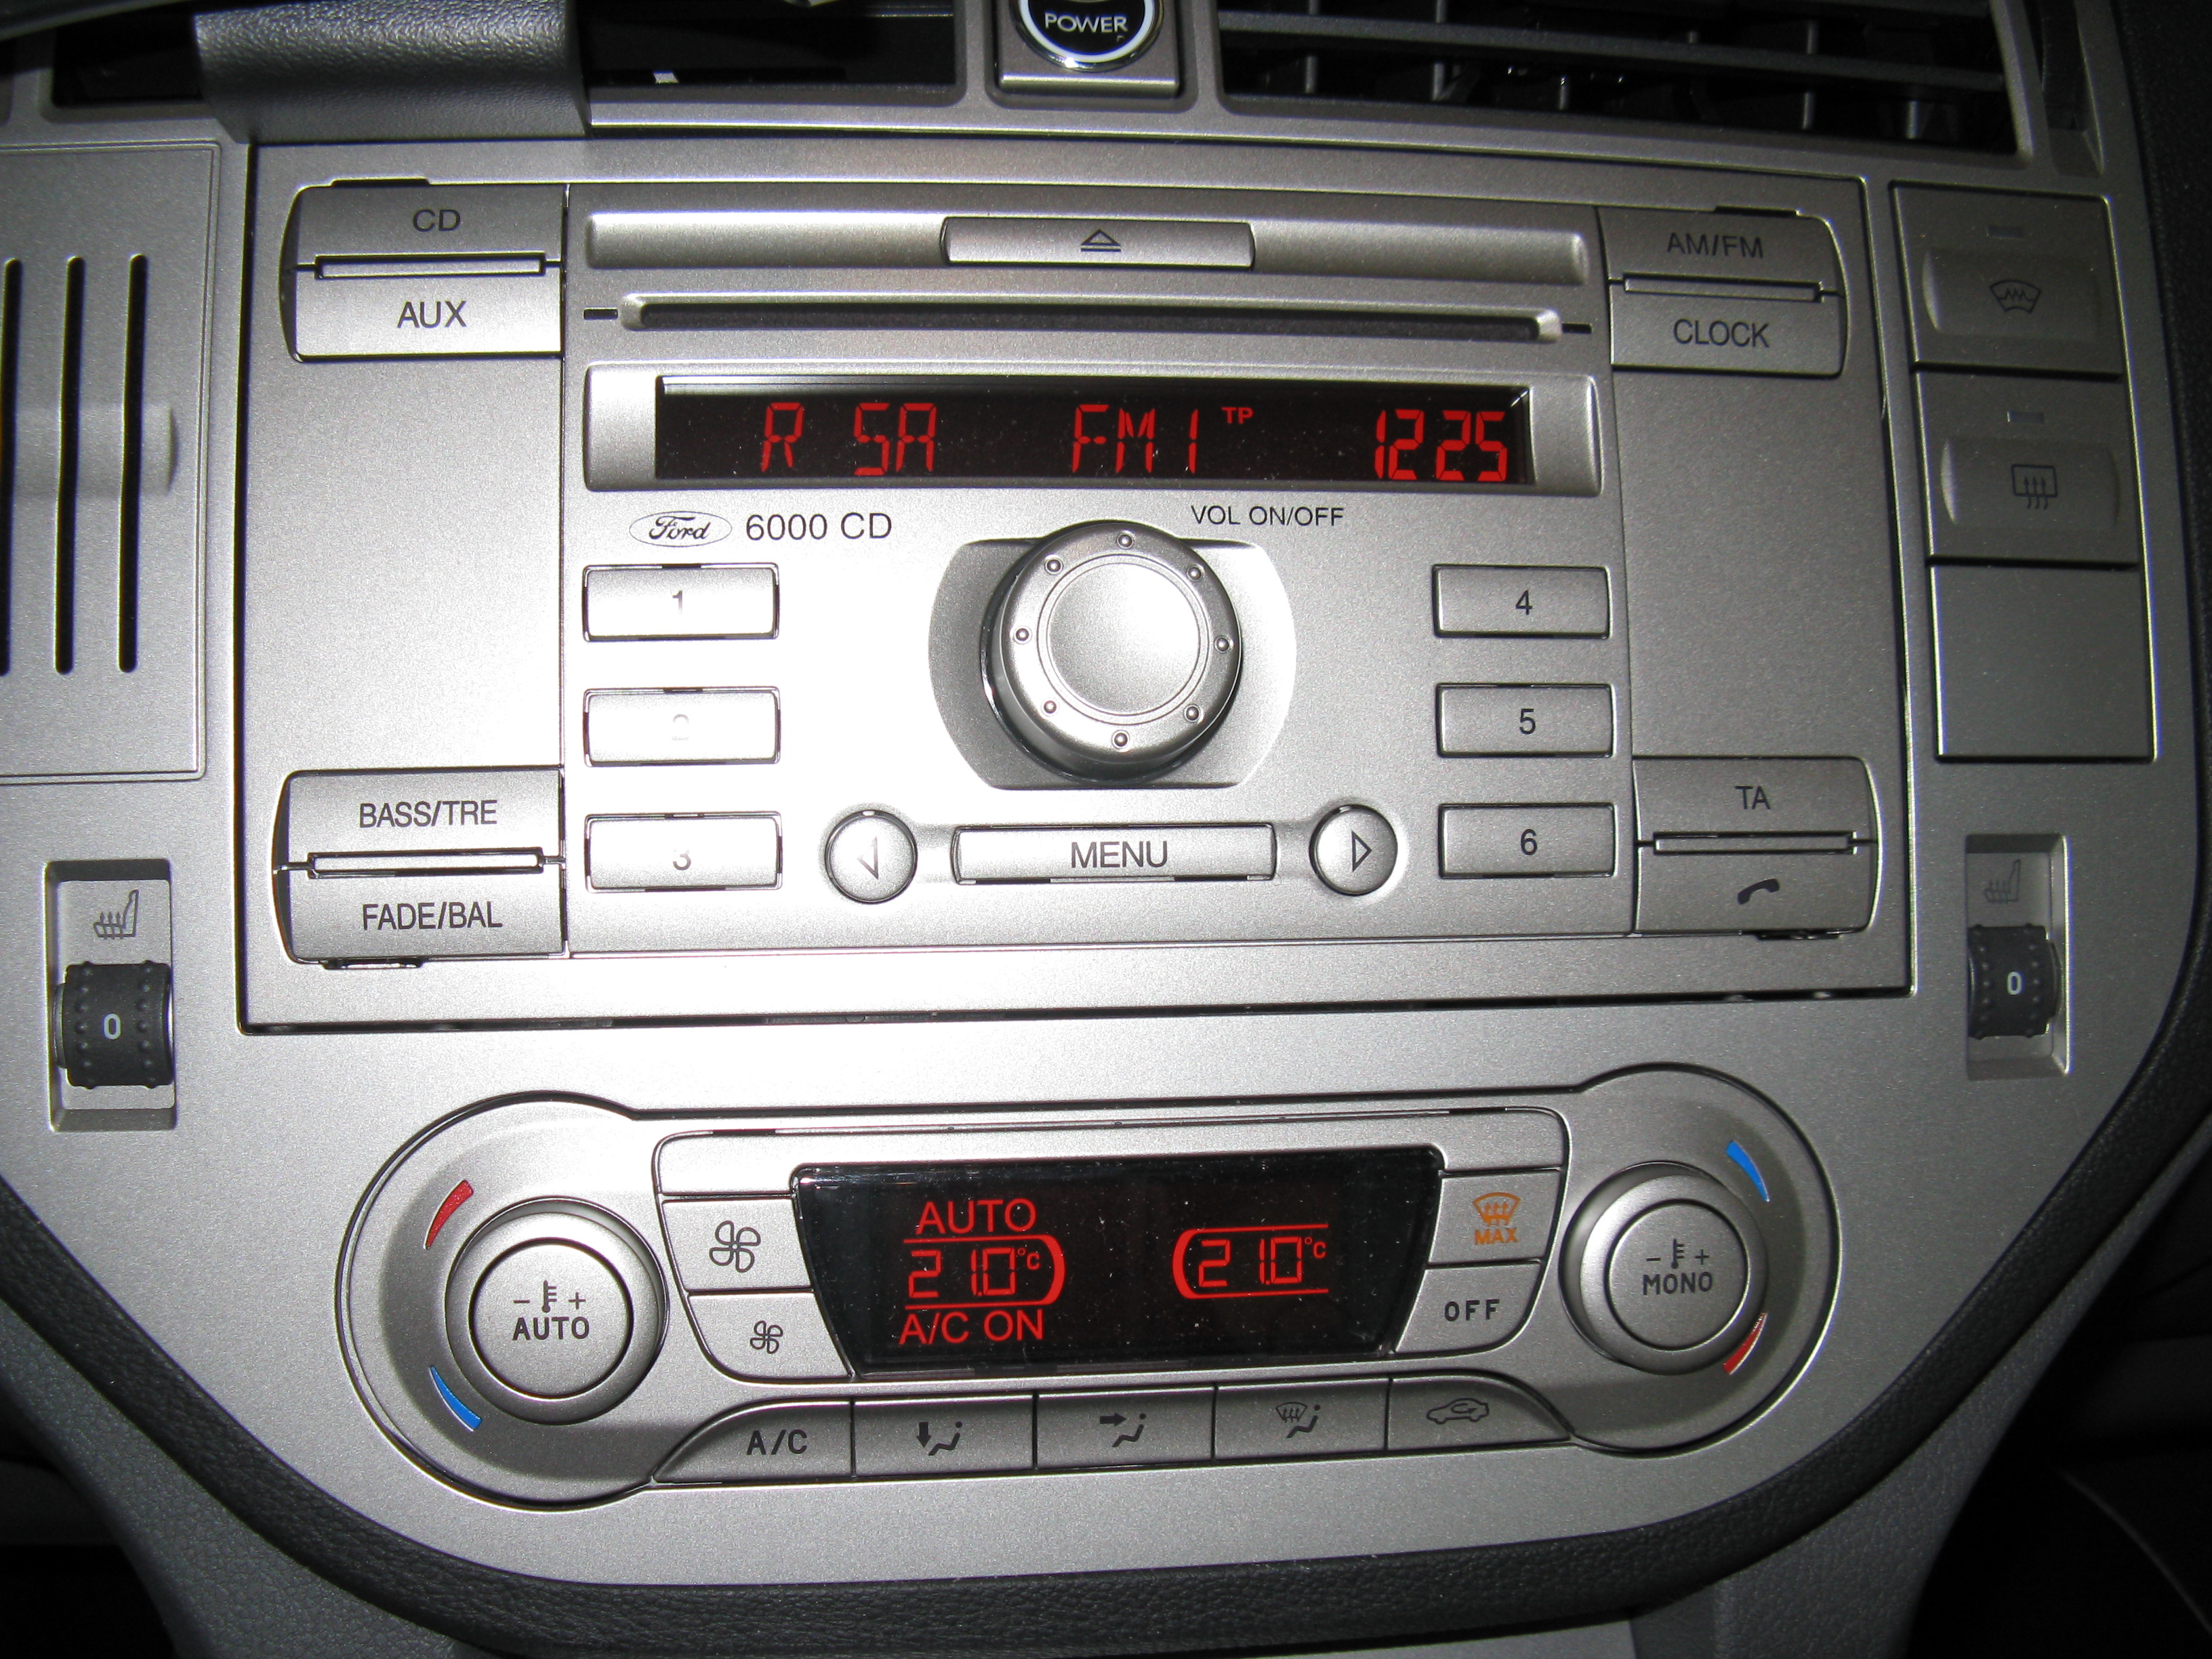 Ford audio system keycode #2